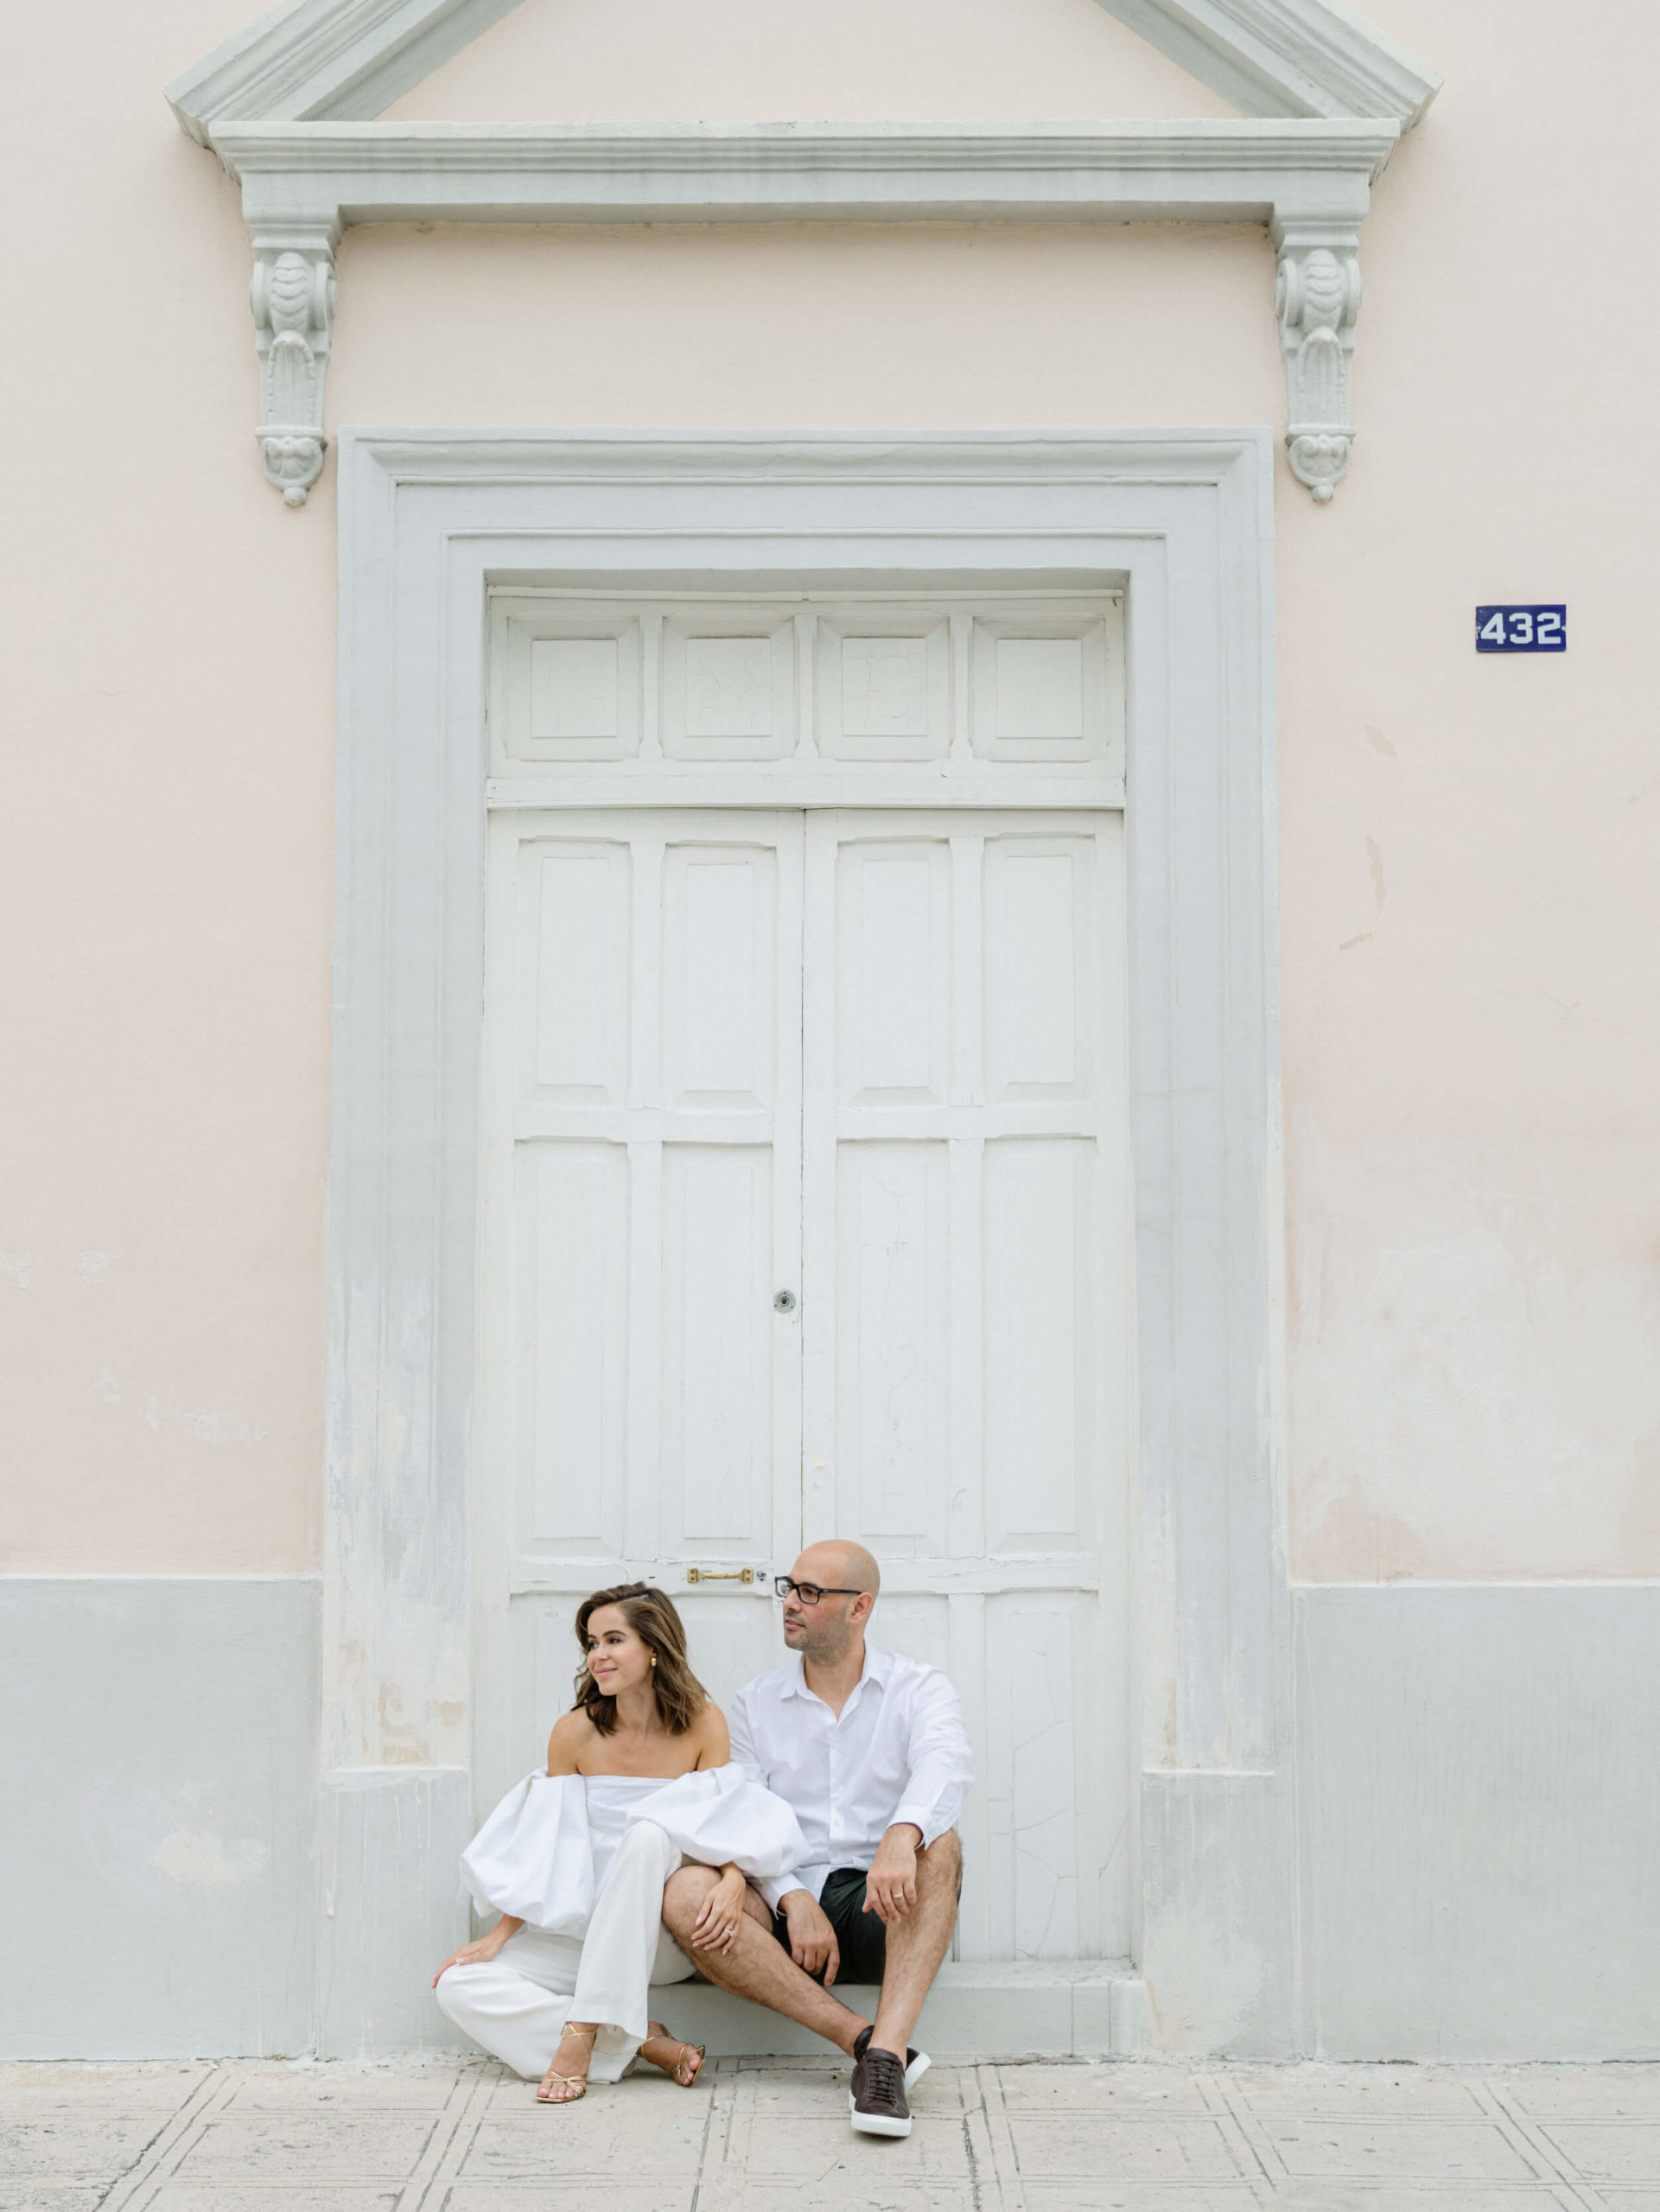 Bride and groom sitting outside an old building